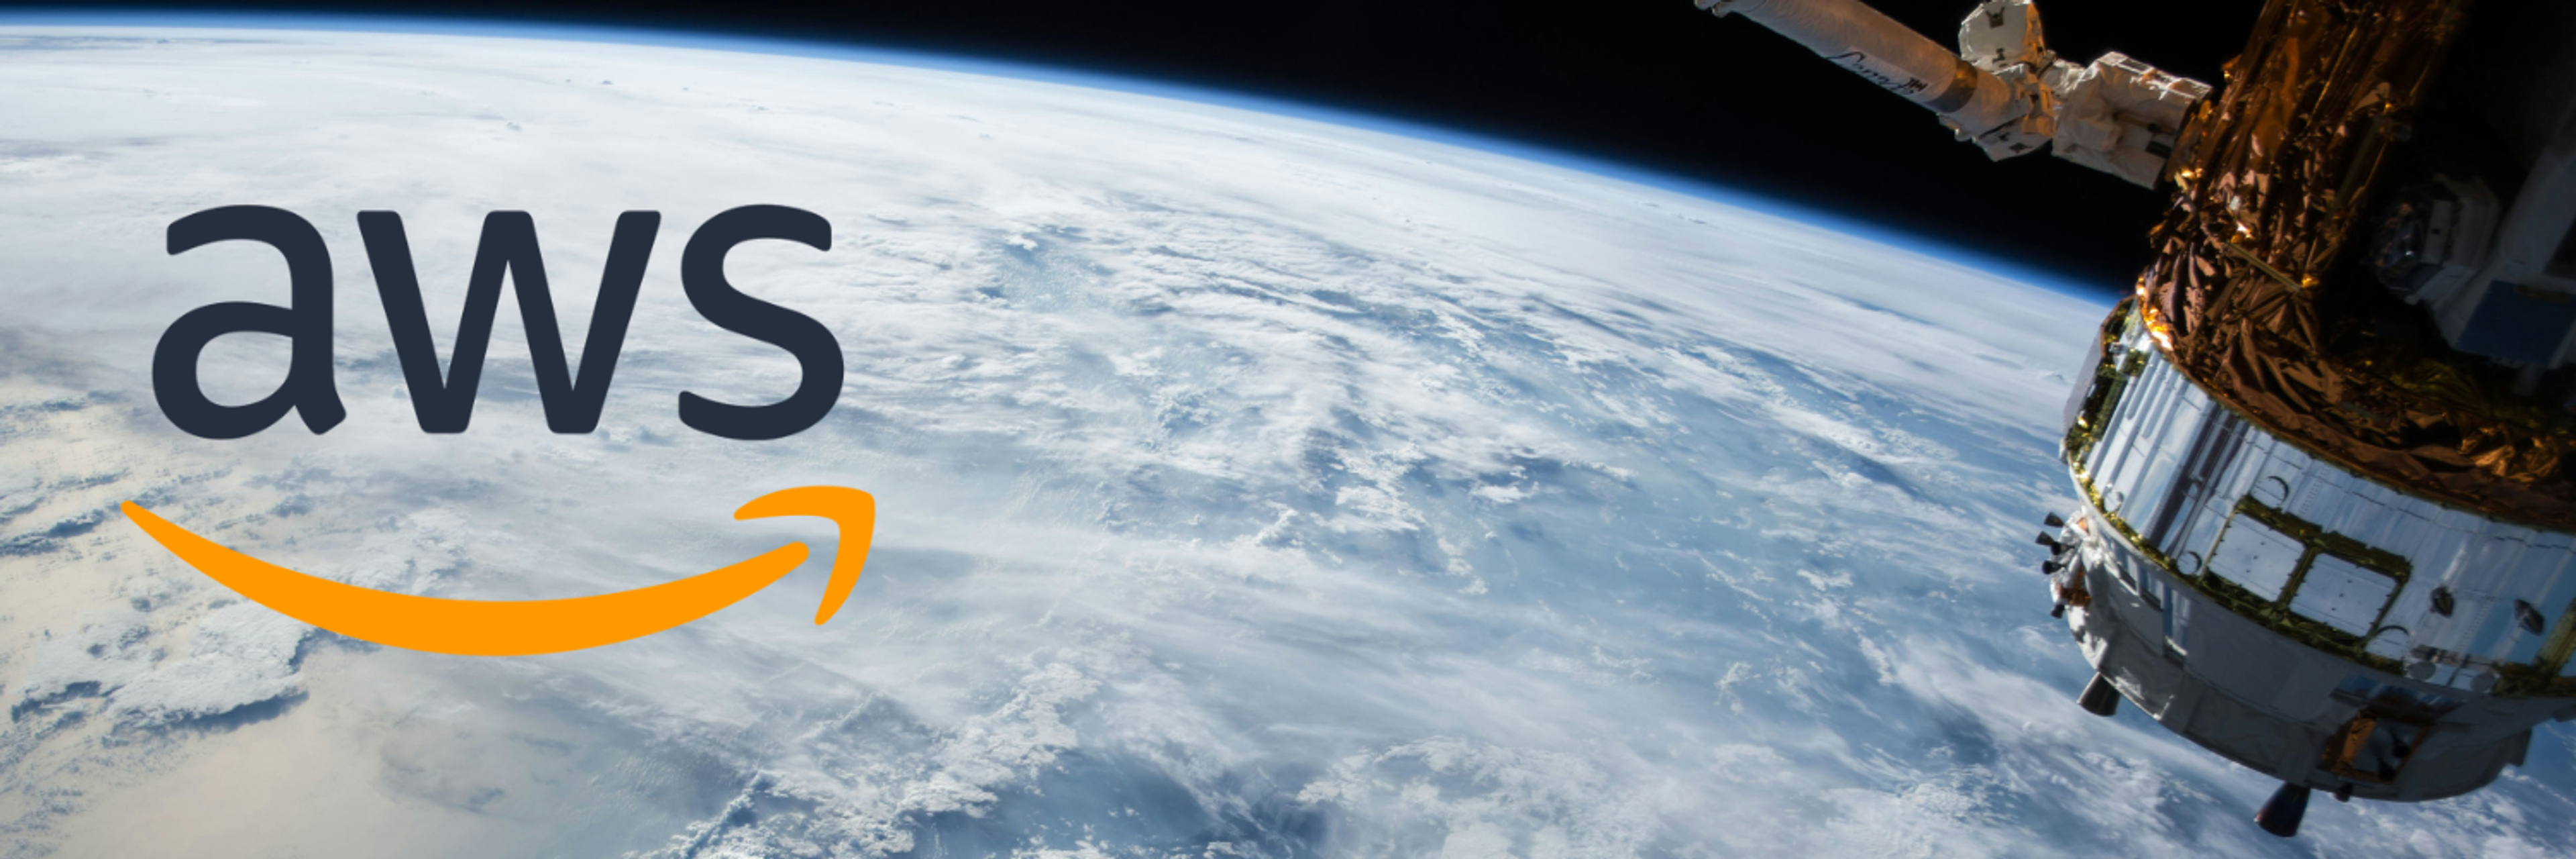 The image shows a satellite orbiting Earth with the AWS logo prominently displayed. The satellite is positioned on the right side of the image, while the Earth's curvature and atmosphere dominate the background. The AWS logo, featuring its distinctive orange swoosh, is placed on the left side, partially overlaid on the Earth. The scene highlights the connection between AWS and space technology.